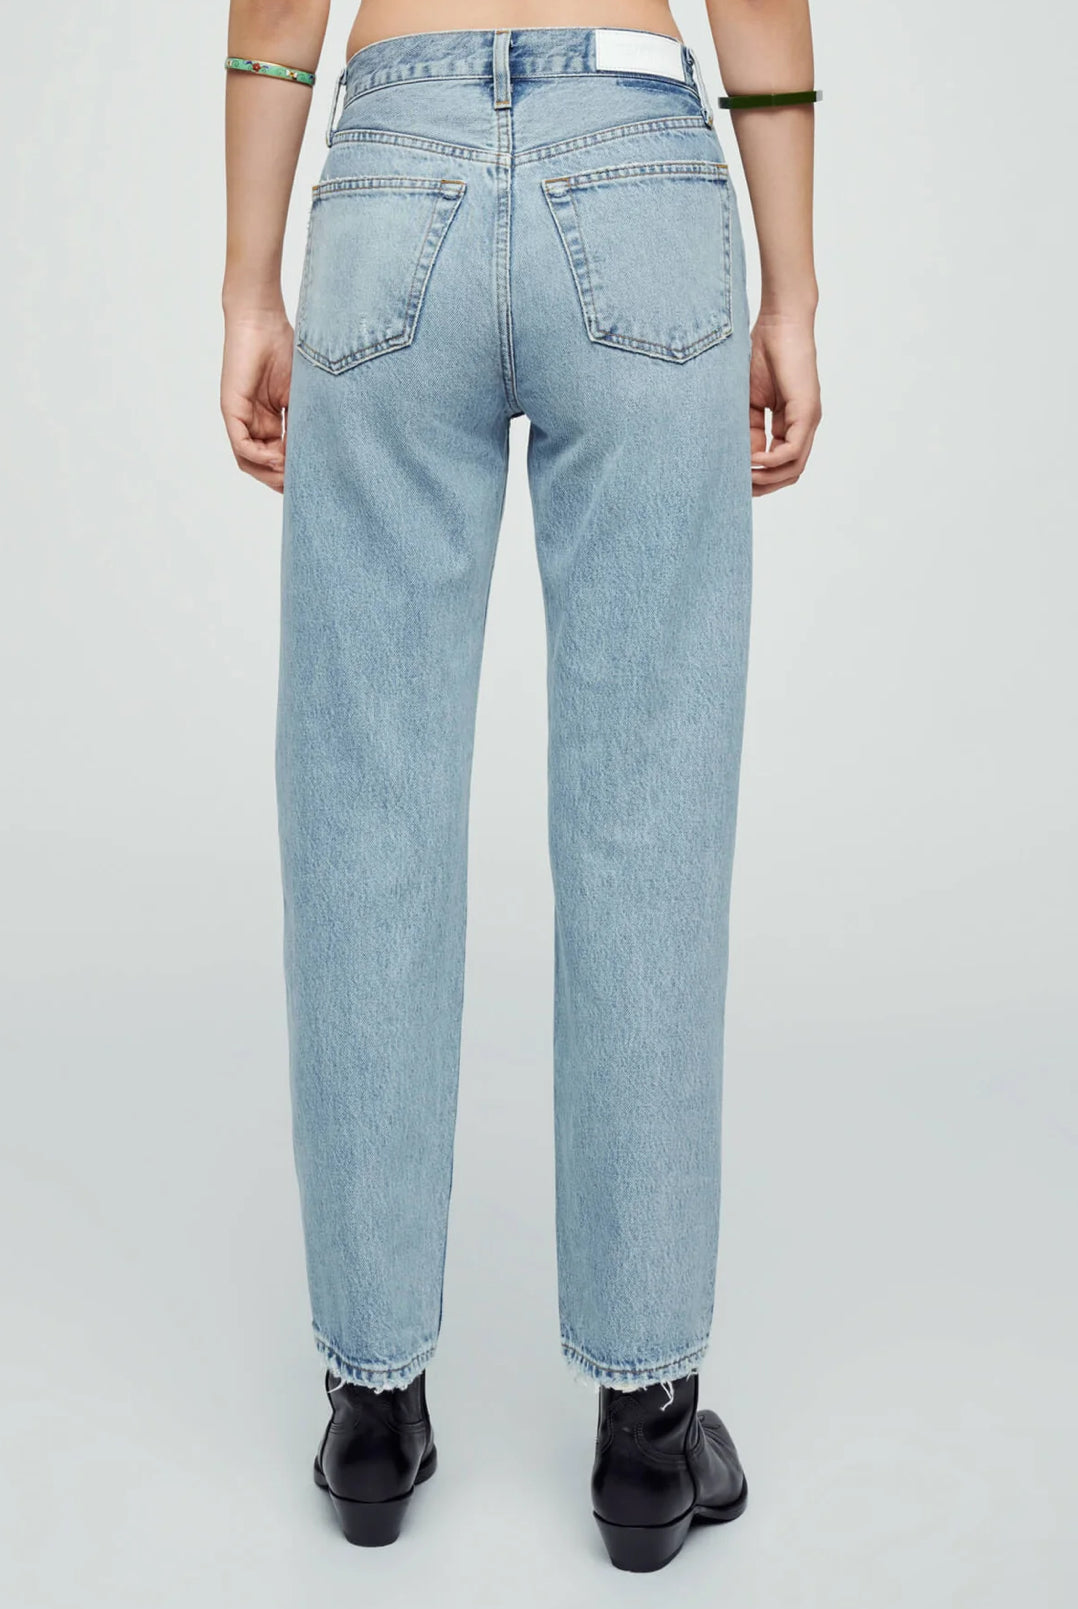 70s Stove Pipe Jeans 3